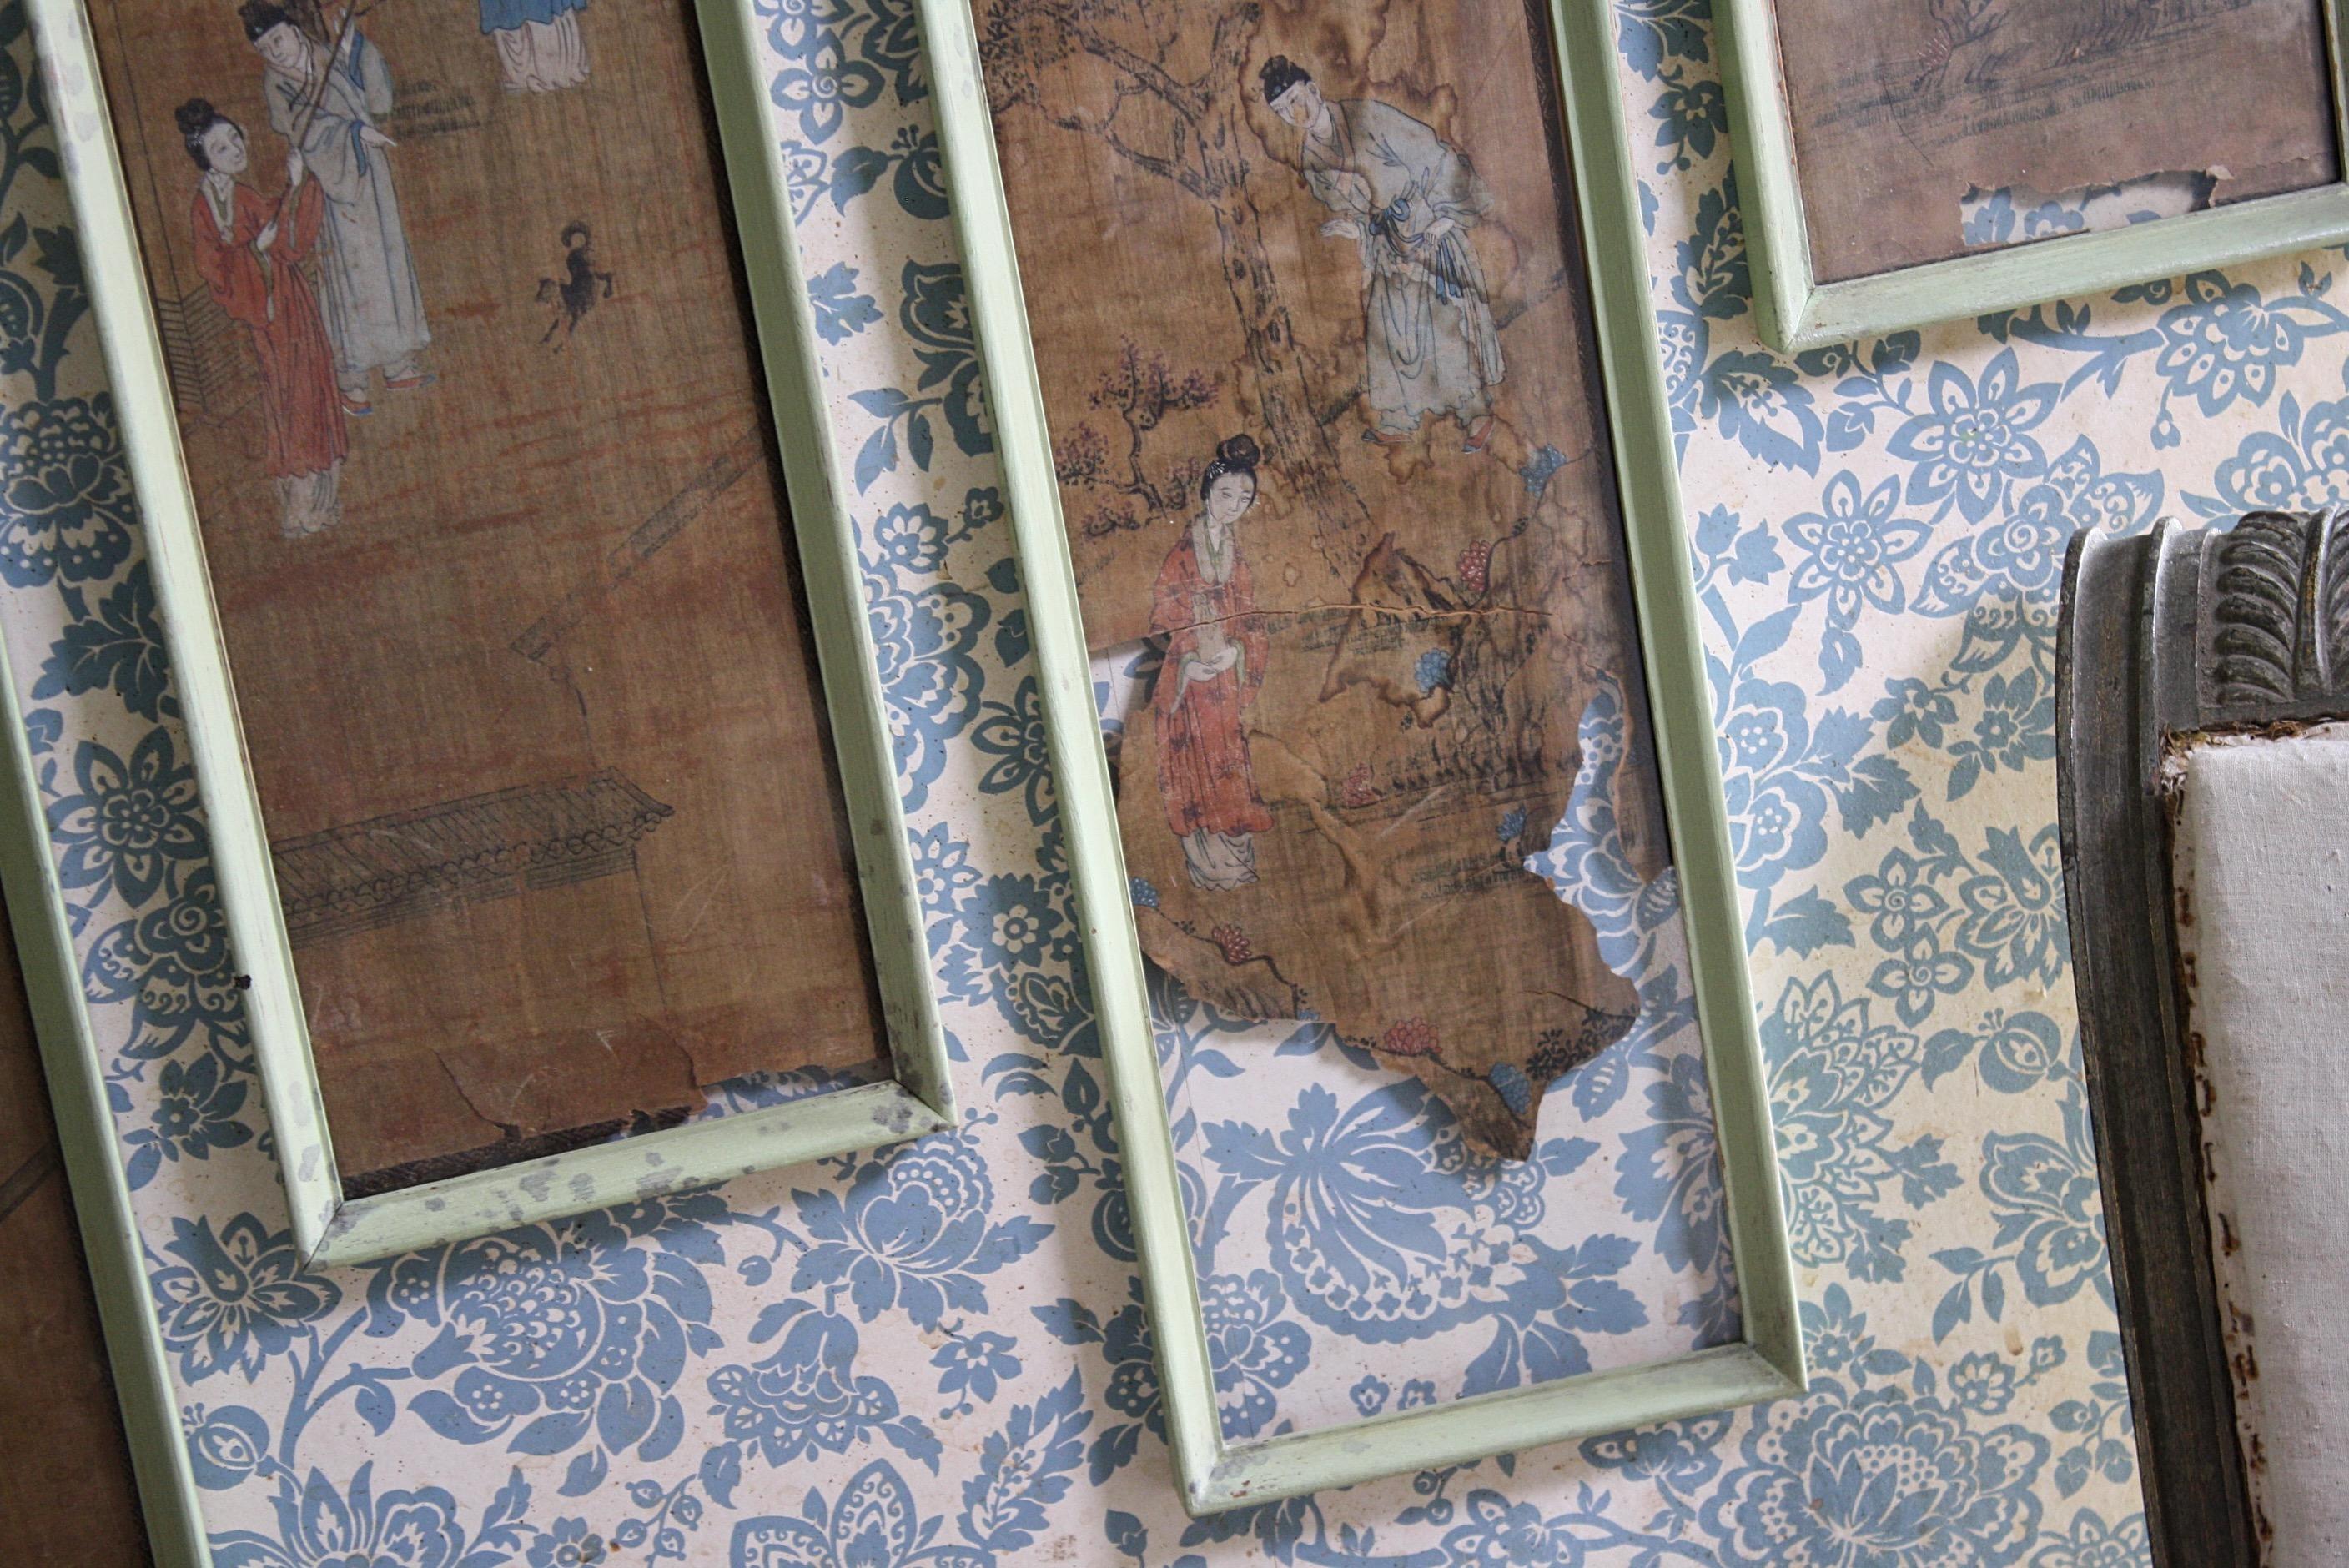 A collection of six 19th century oriental outdoor scenes, watercolours on rice paper.

Stains, losses and discolouration, housed in later overpainted glazed frames but with a wonderful country house decorative look.

Each painting is 77/19/3cm

 

